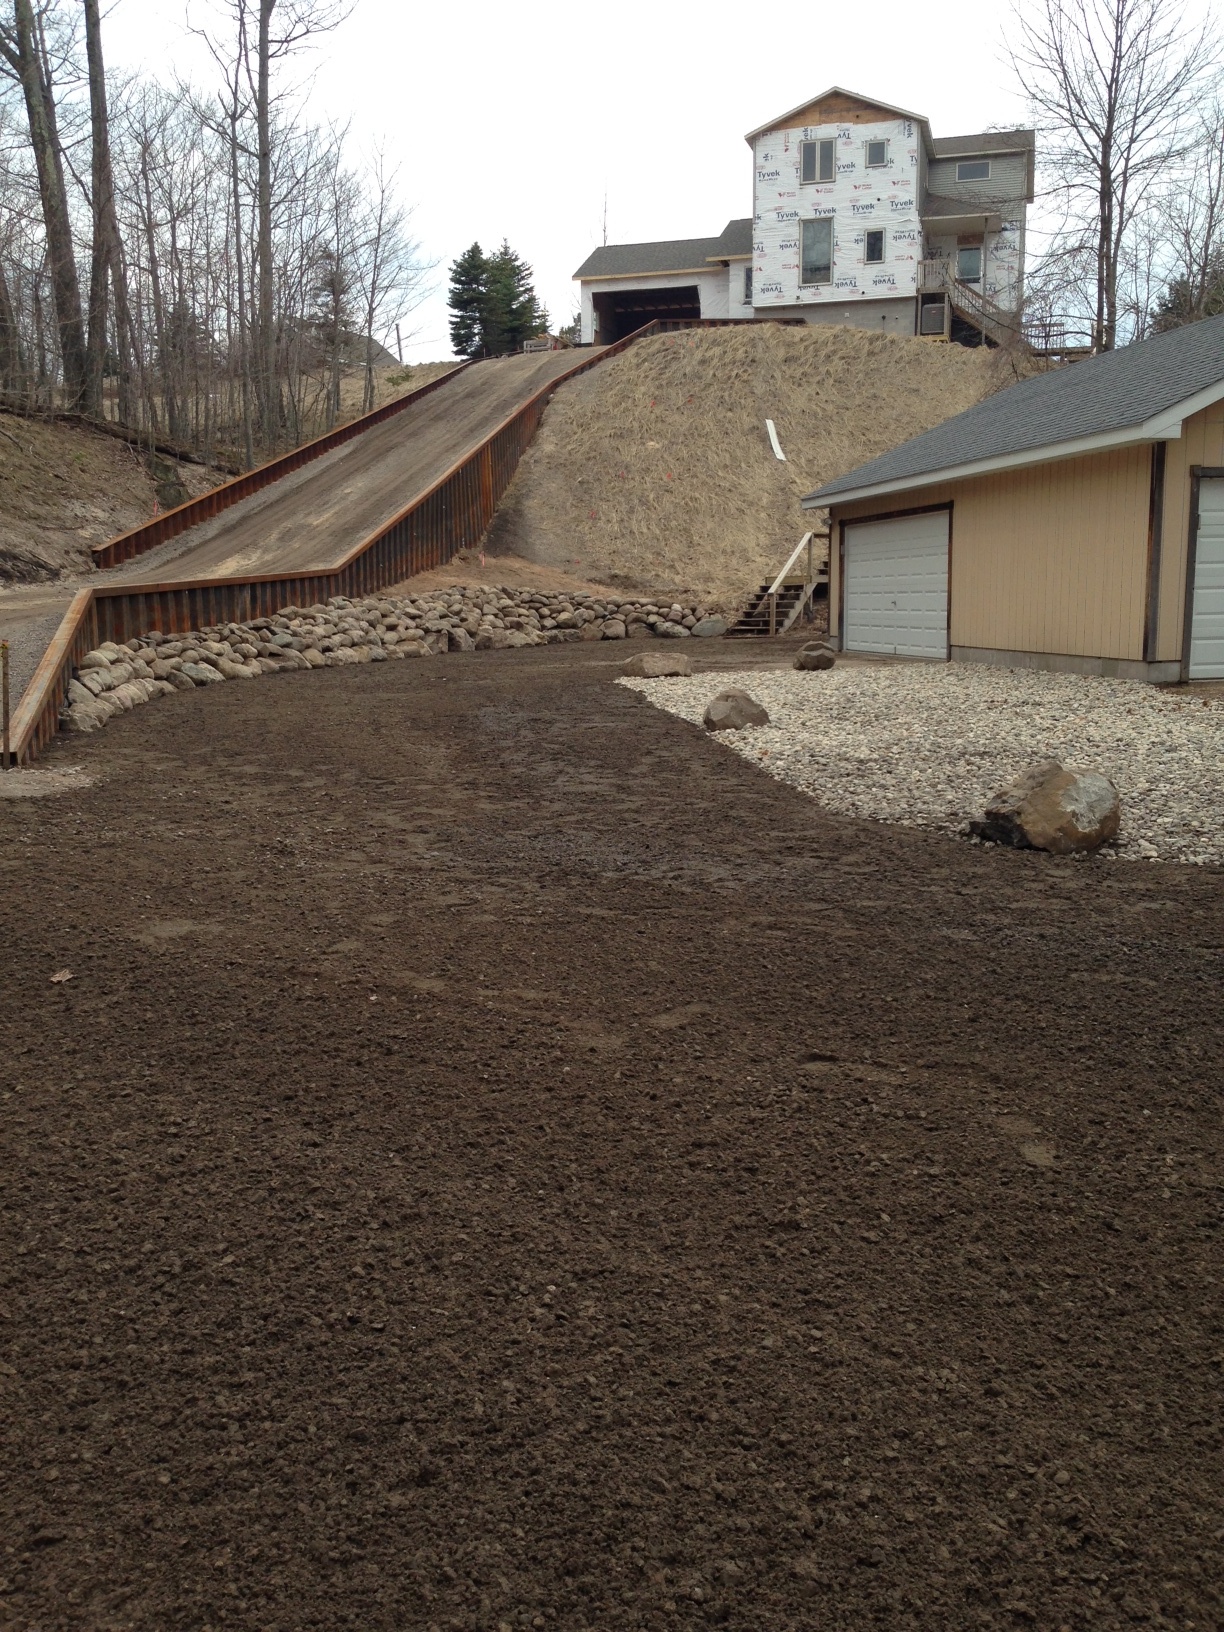   Steel Retaining Wall/New Driveway/Bank Stabilization/Rock Placement, photo 2  